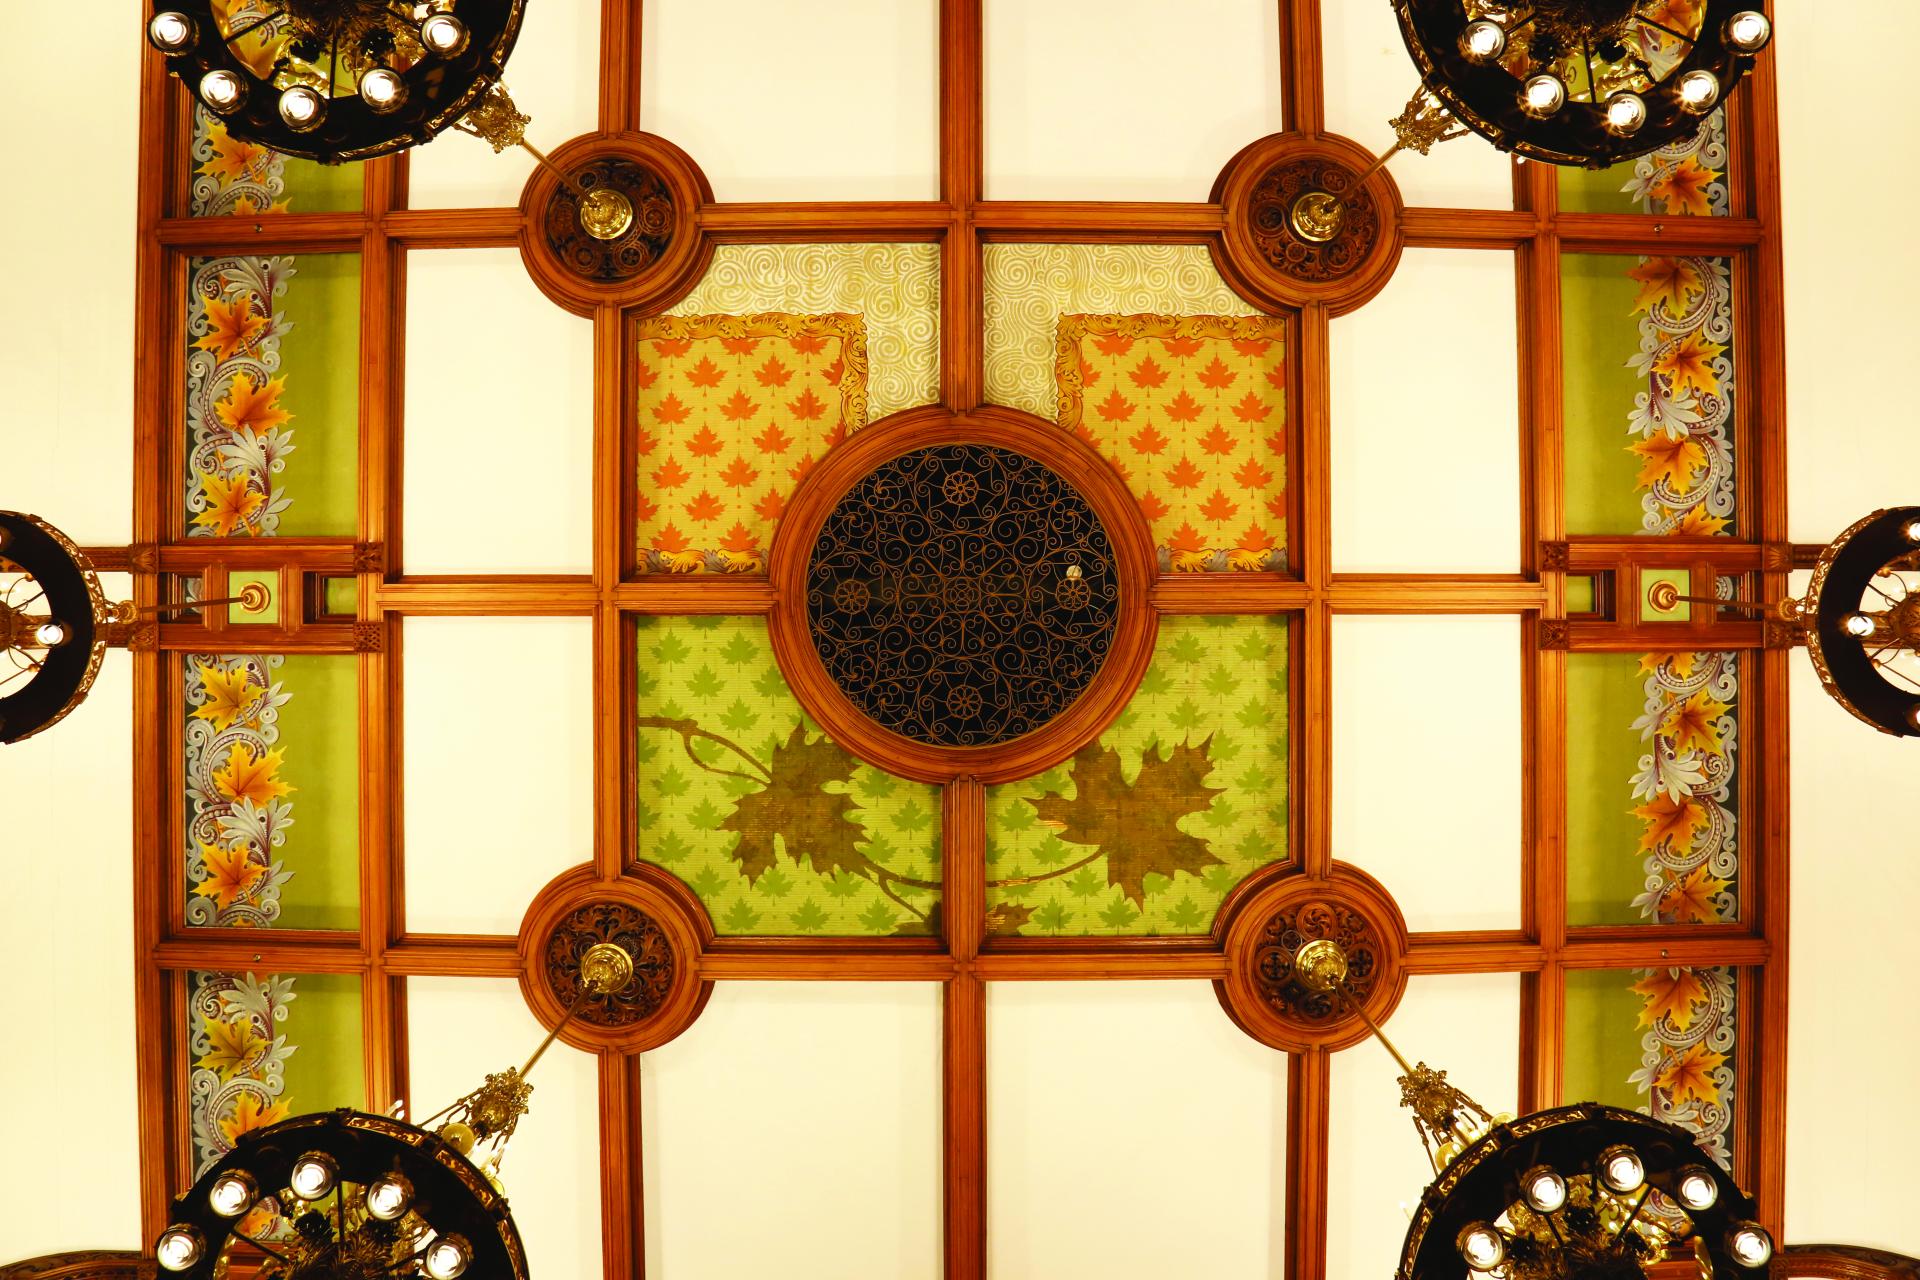 Picture of the ceiling decor in the Legislative Chamber